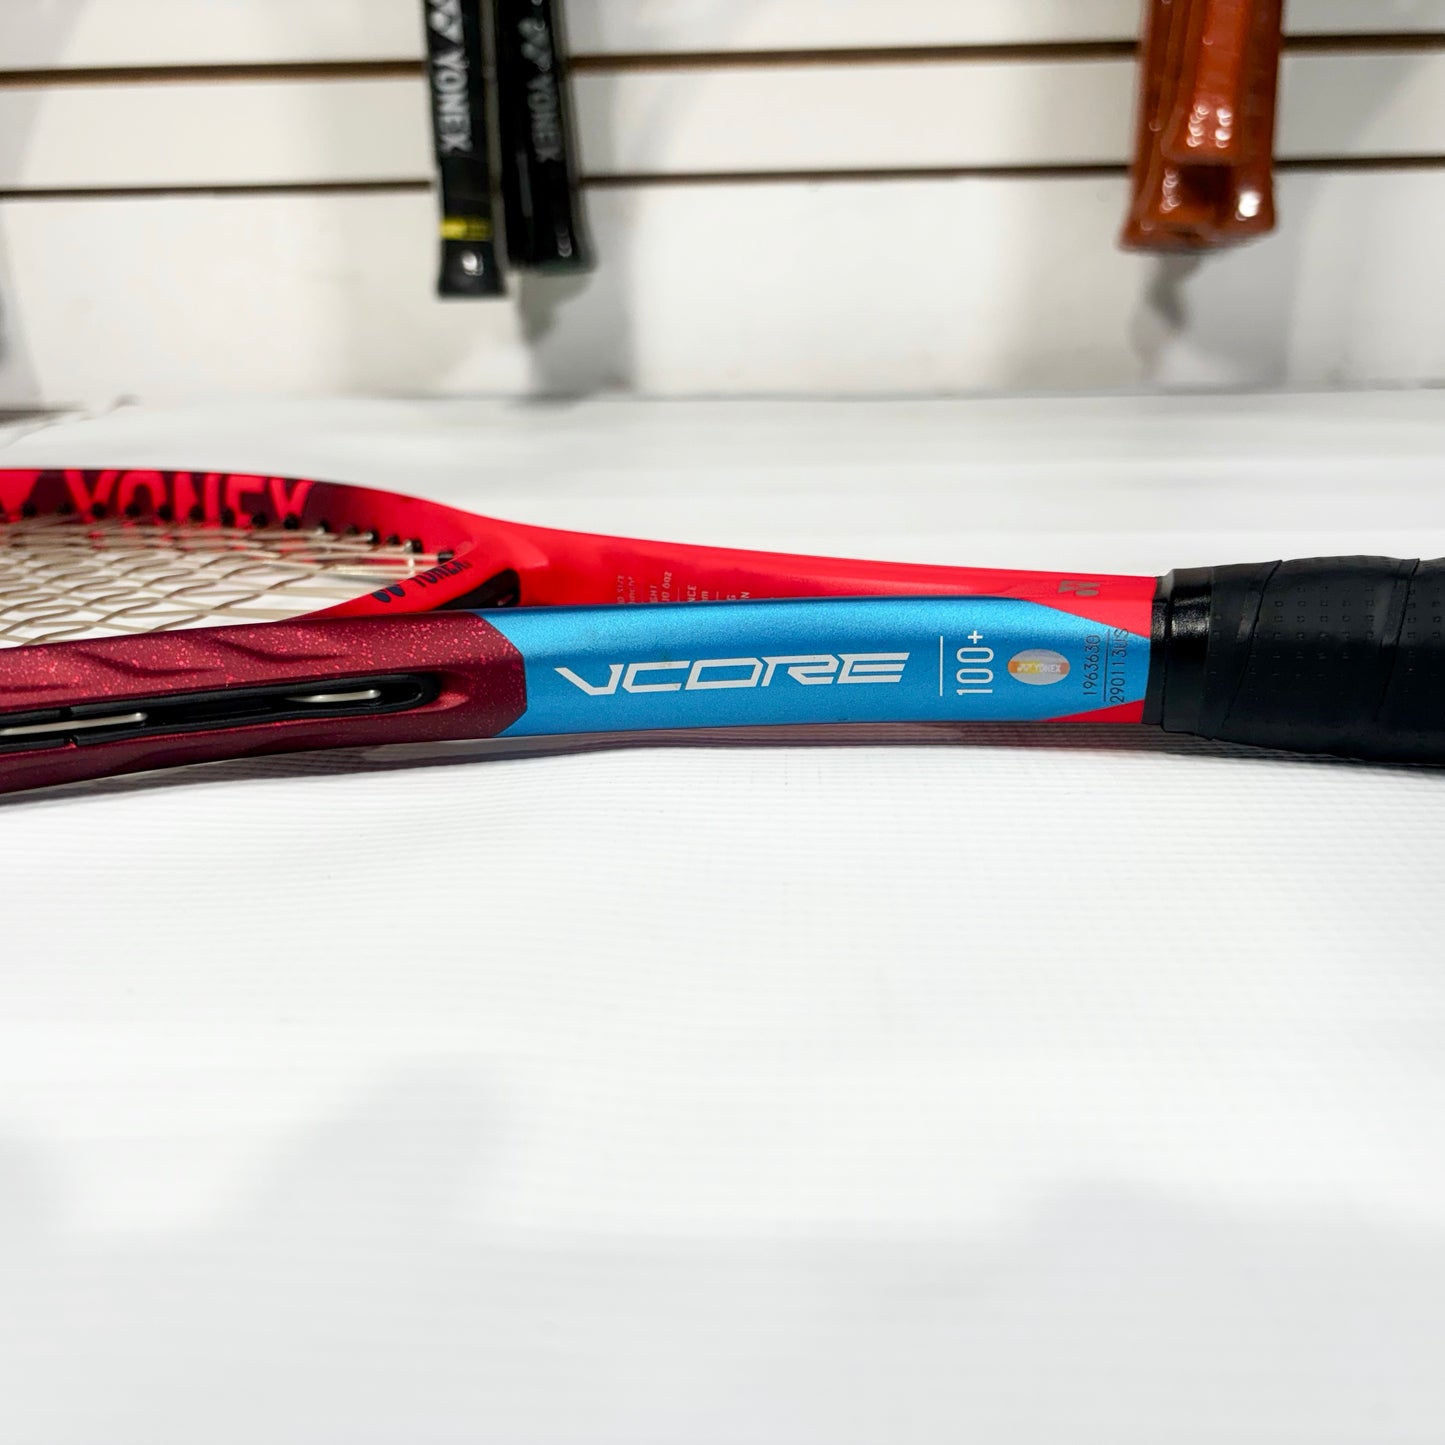 Yonex Vcore 100+ gripsize 4 3/8 (Condition 9/10) Made in Japan 240422-3